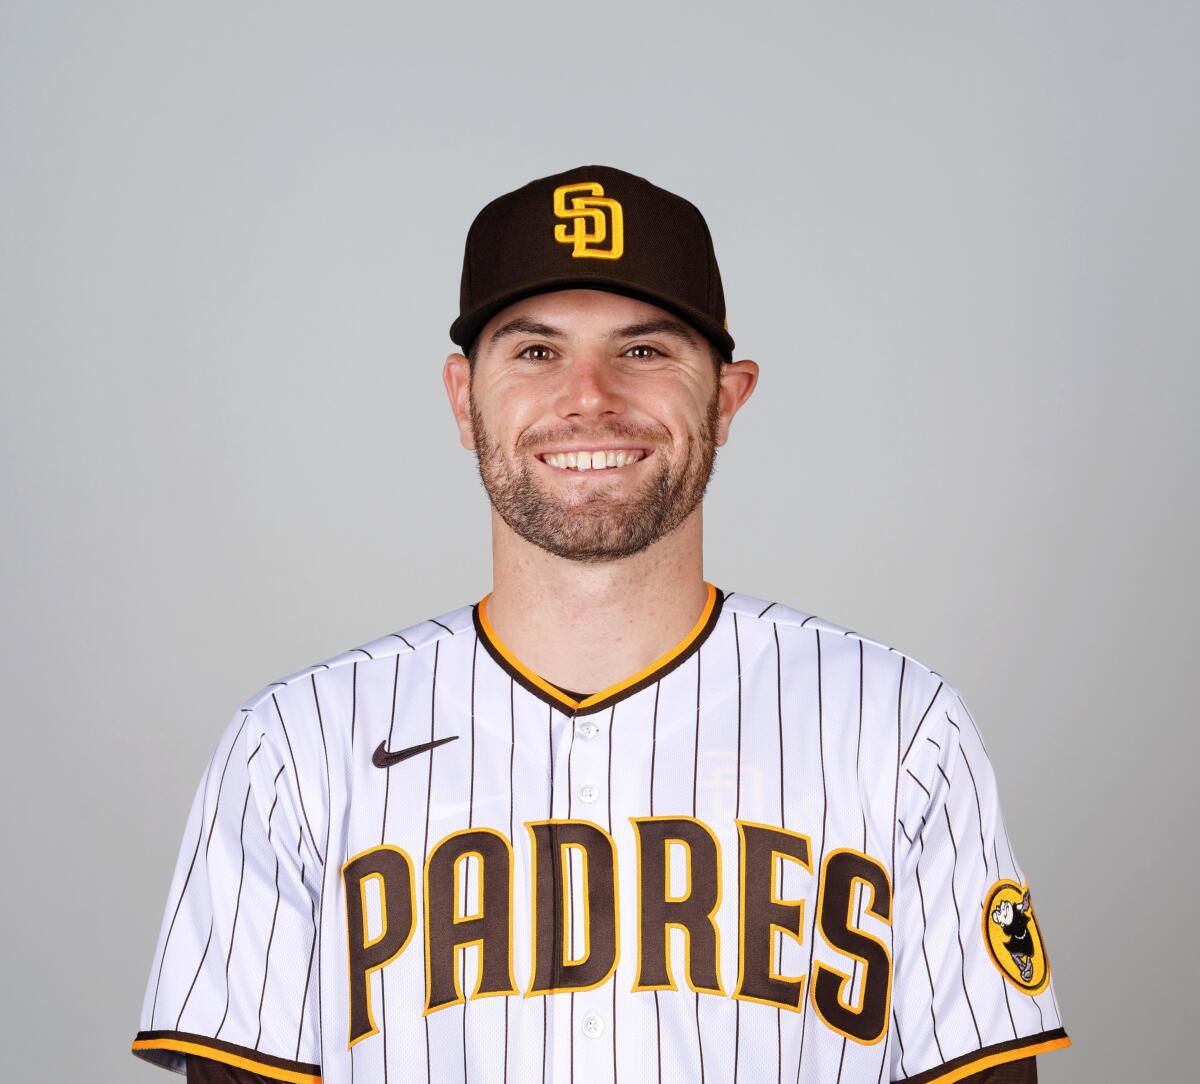 New Padres hitting coach Michael Brdar is young, yet brings experience